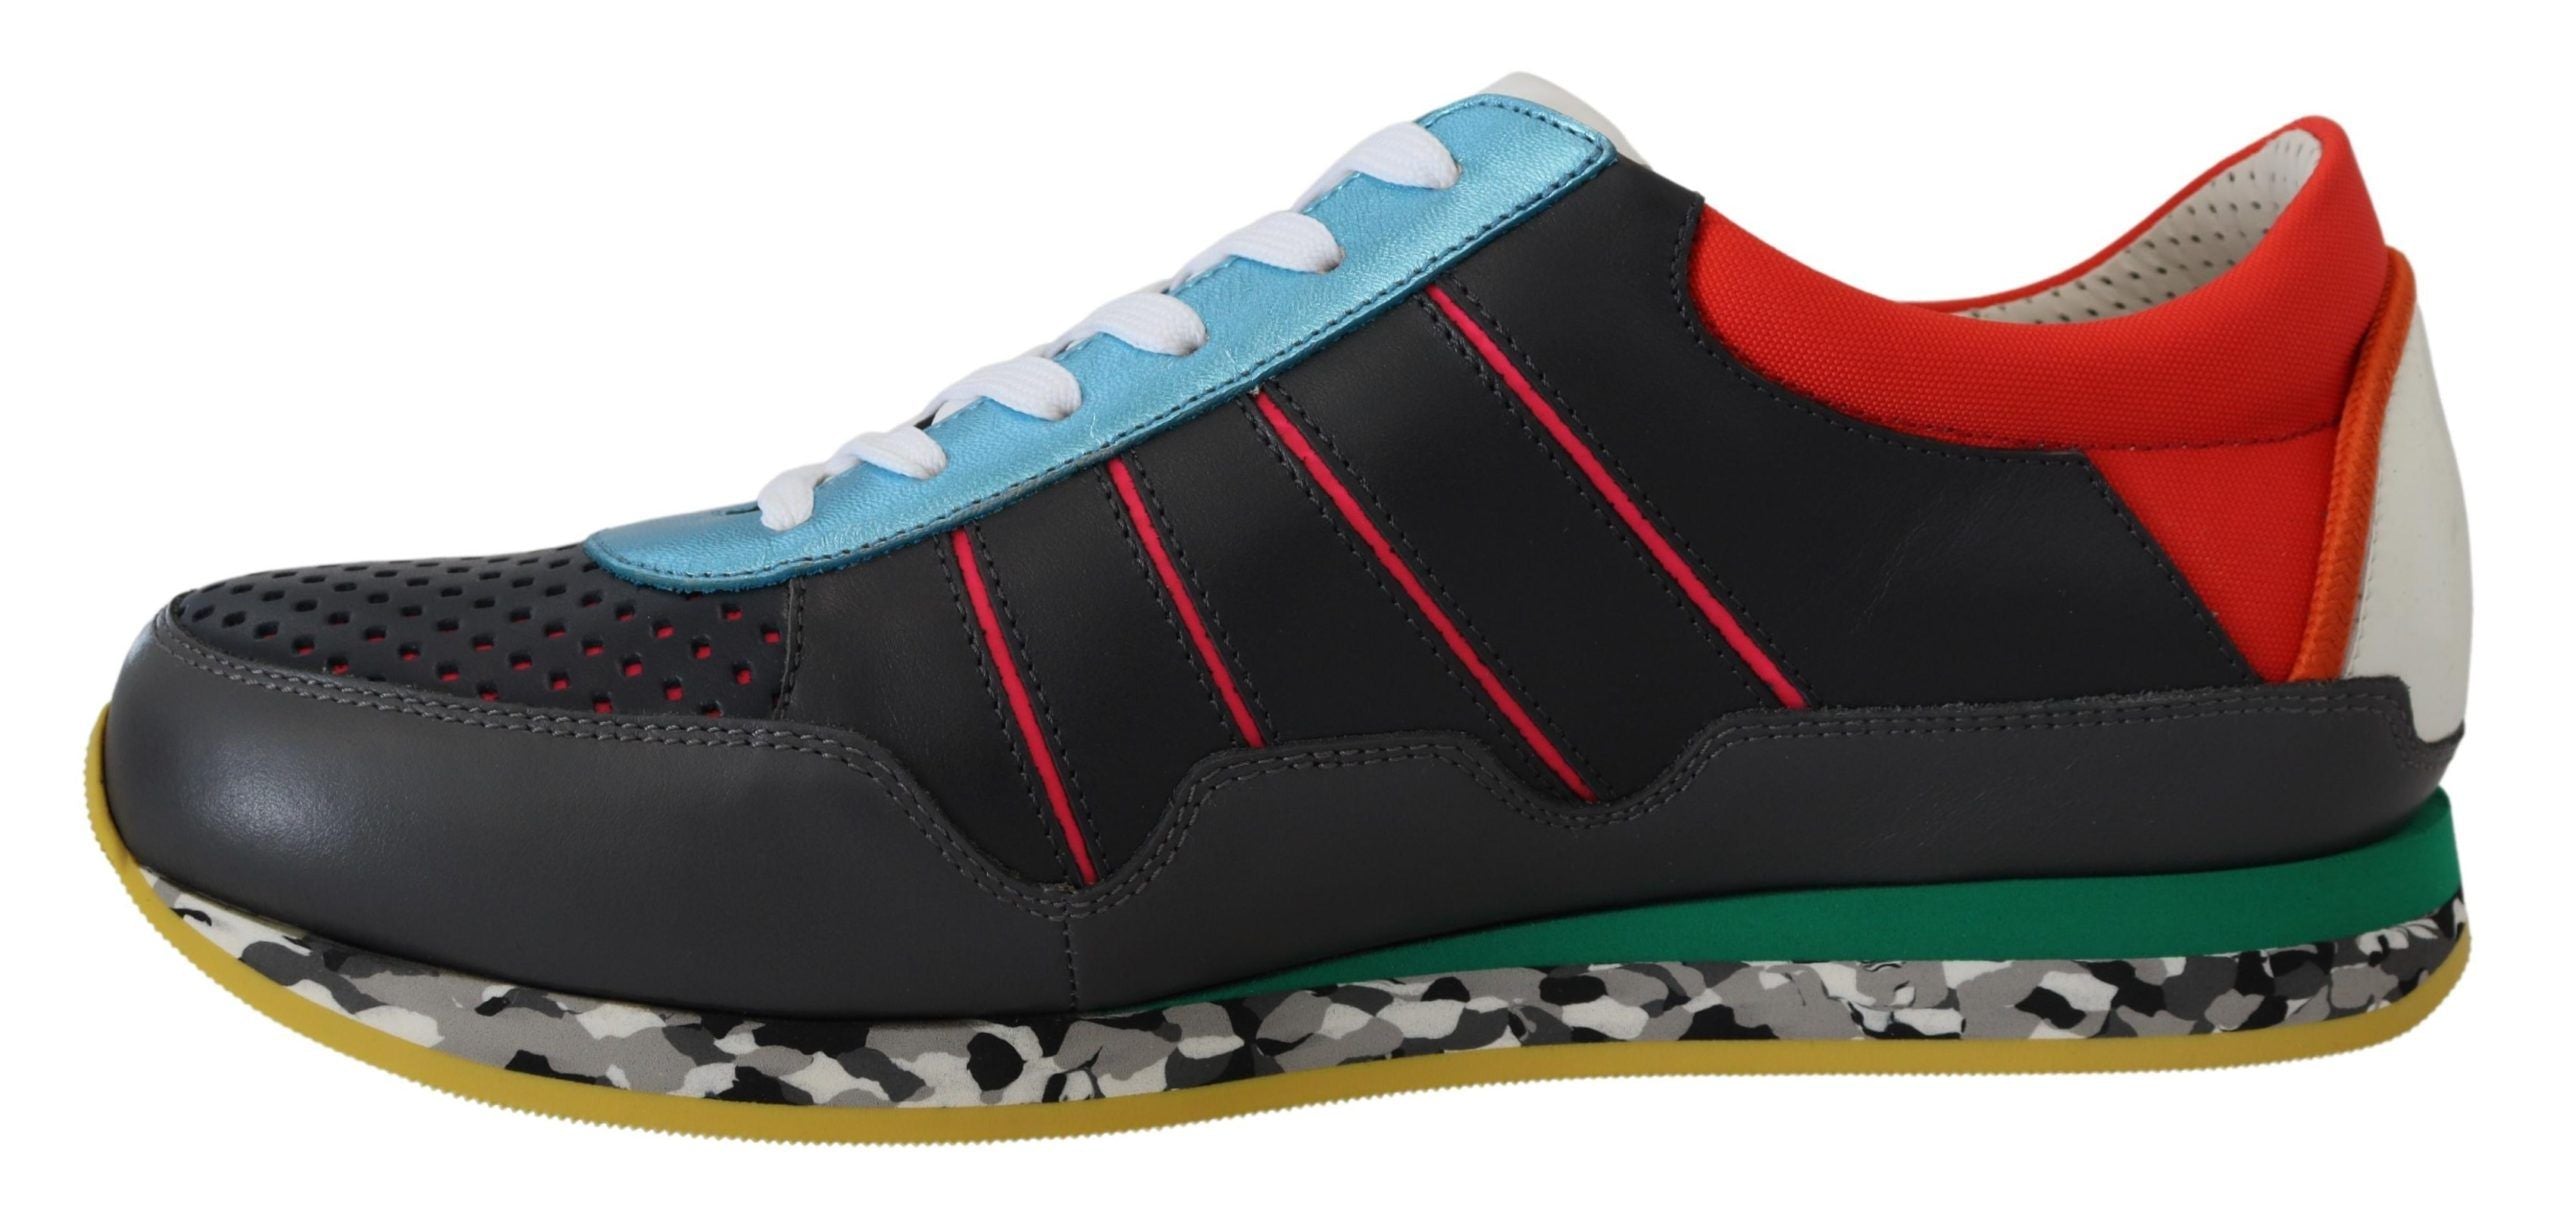 Dolce & Gabbana Multicolor Leather-Blend Low Top Sneakers